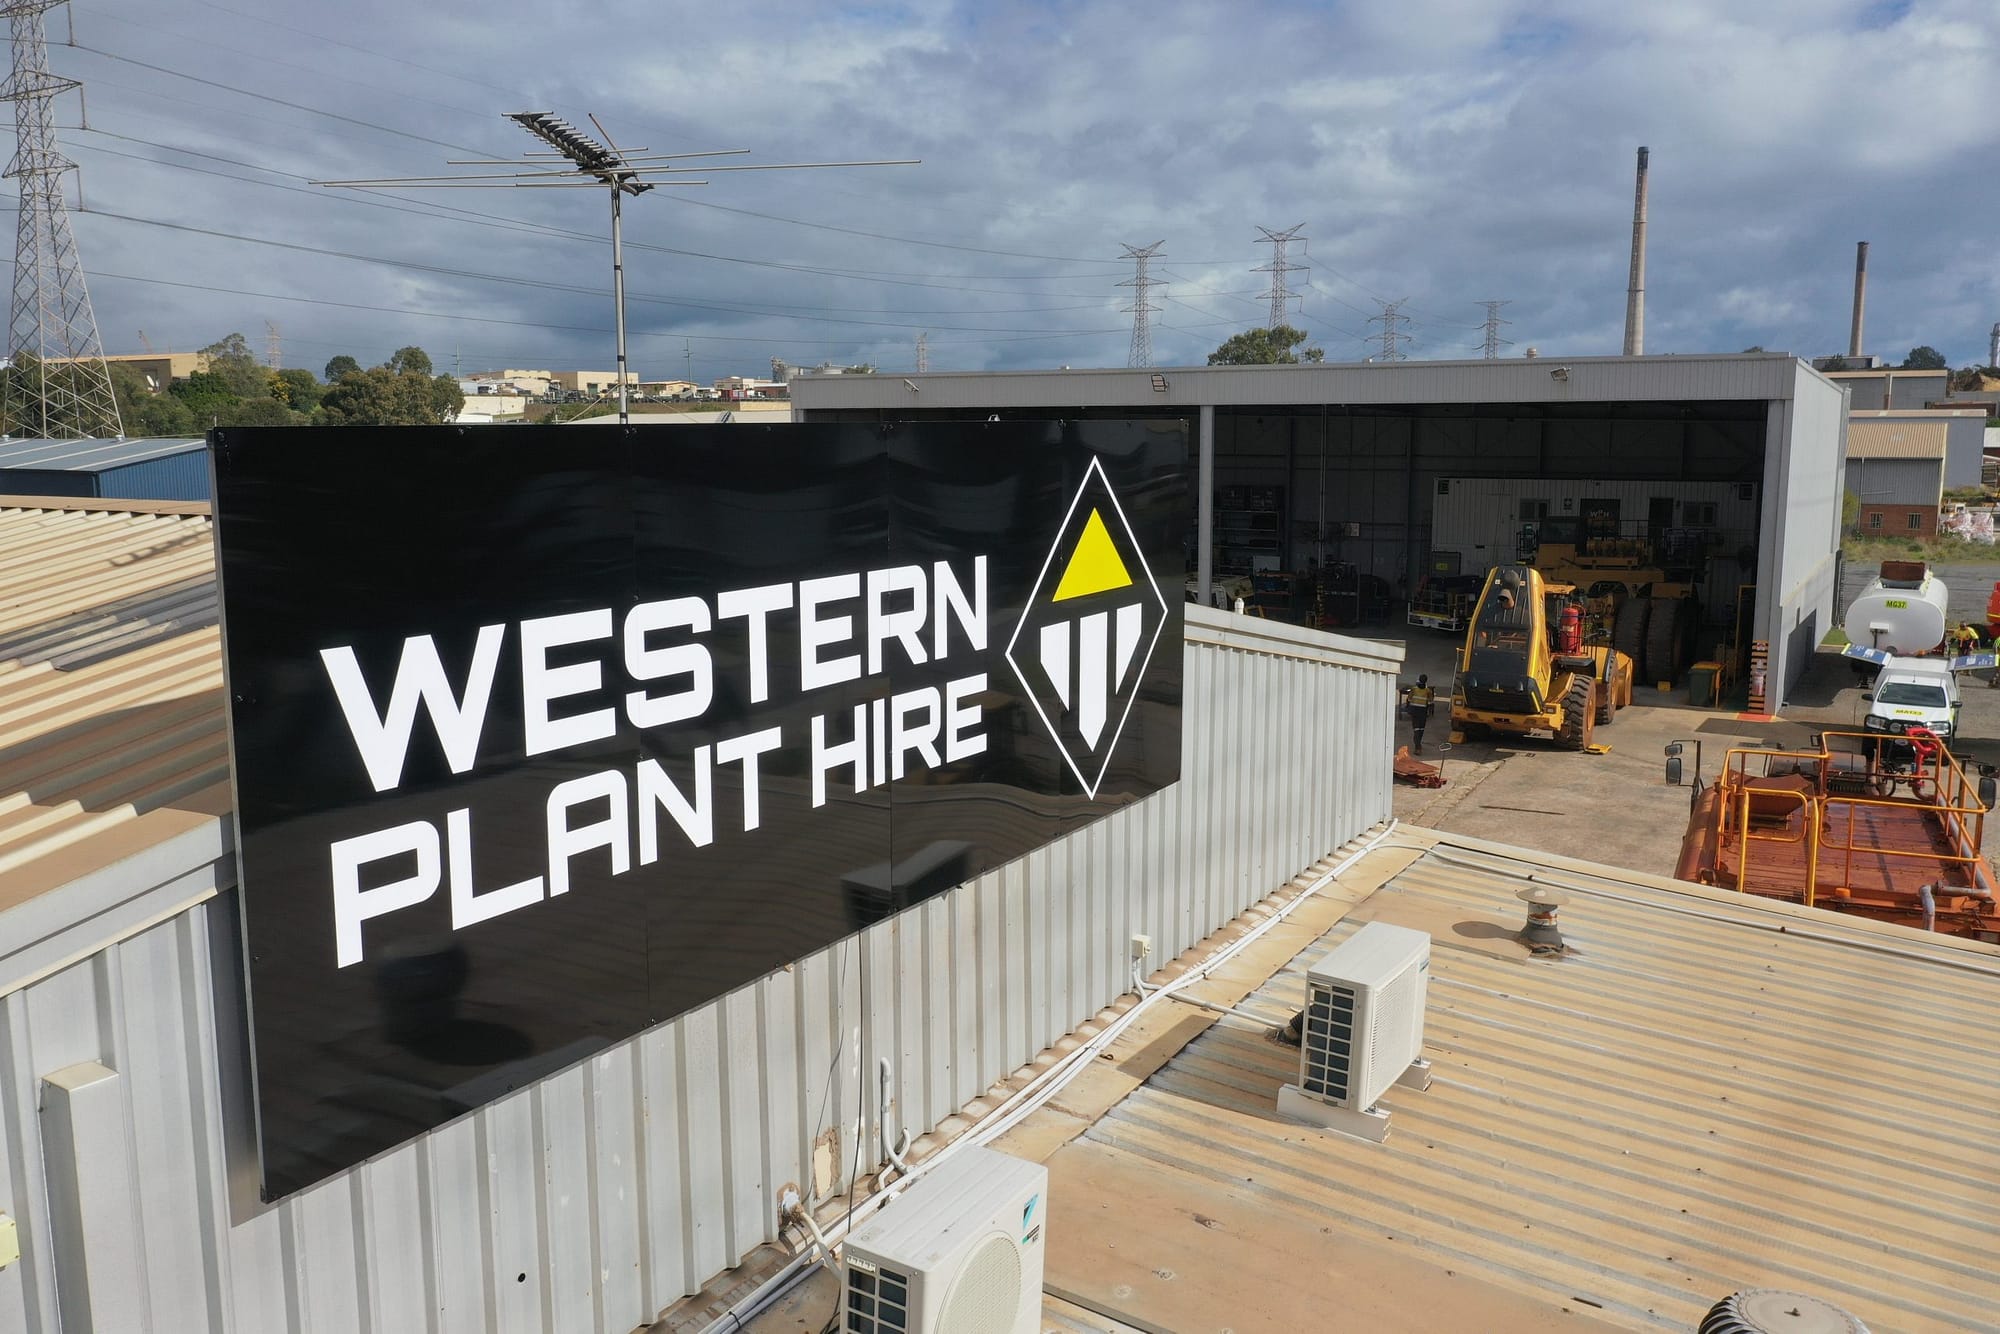 Western Plant Hire